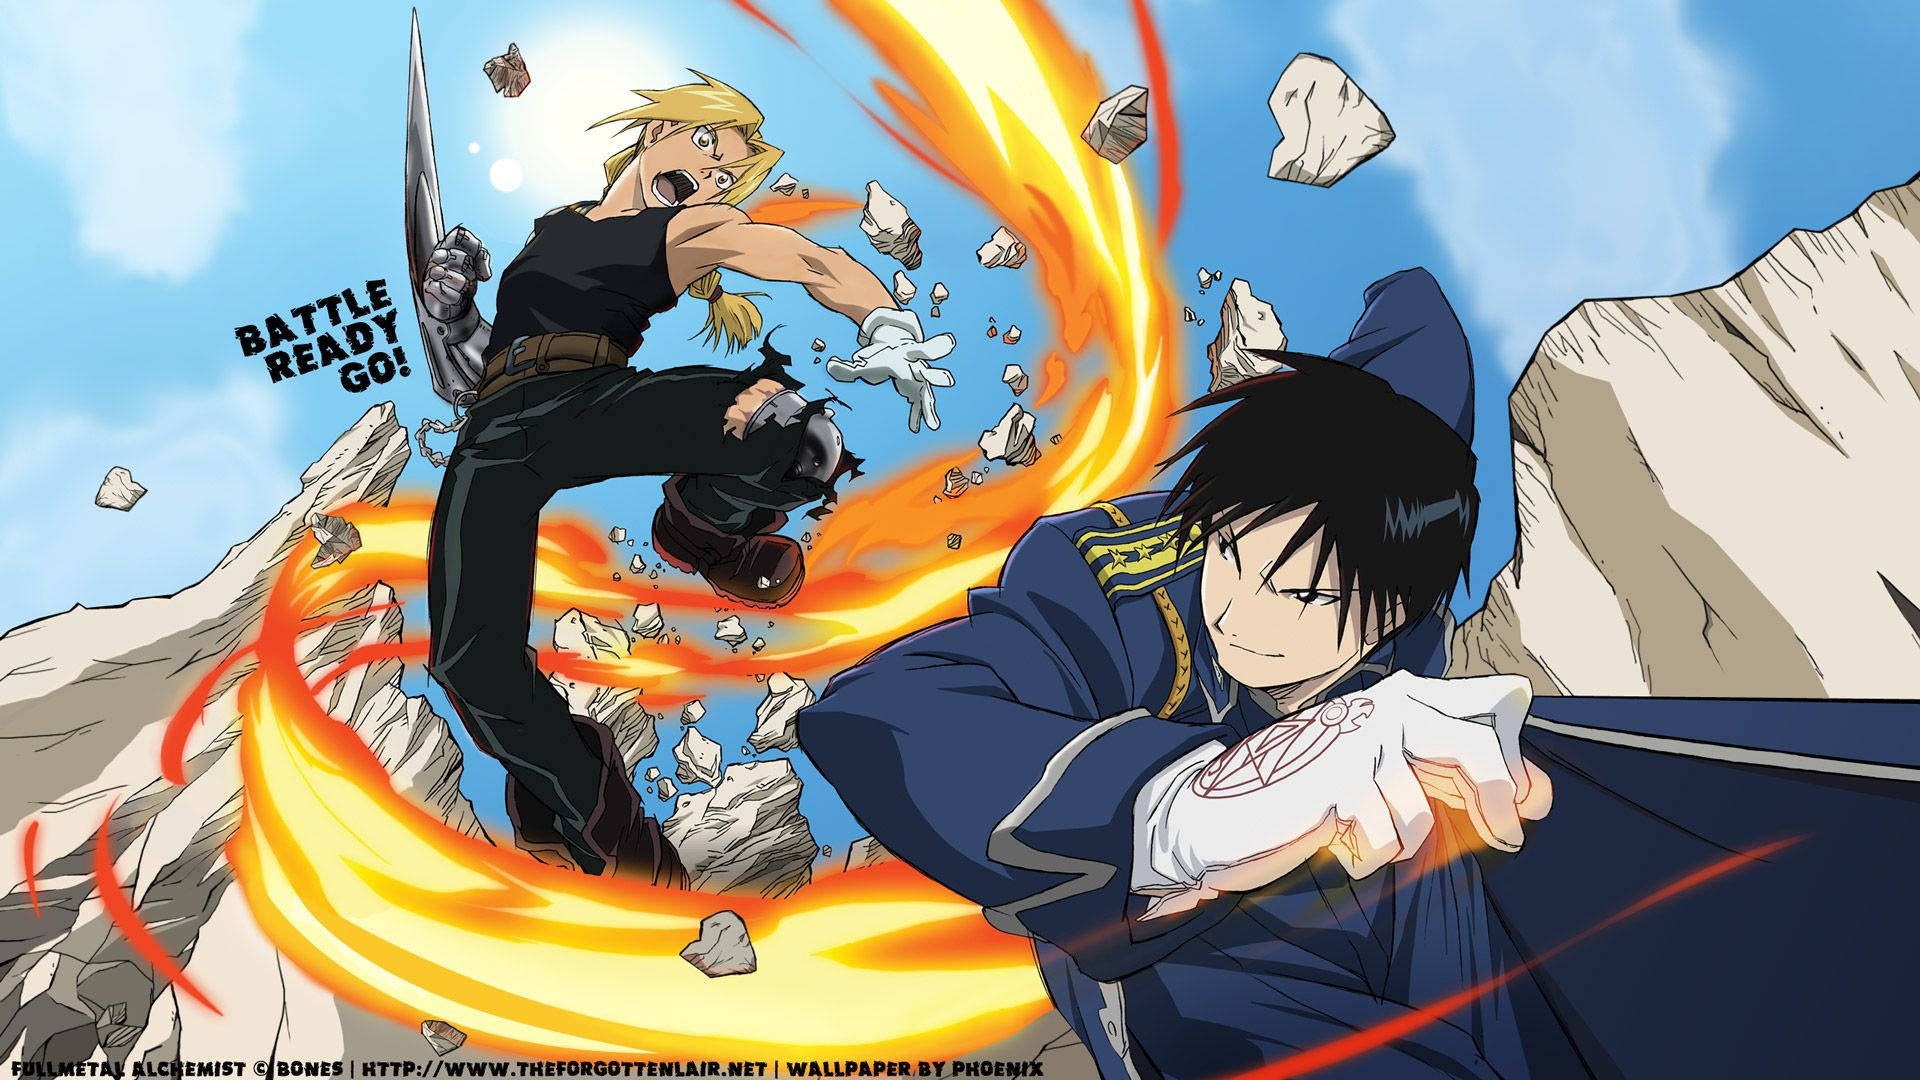 Edward Elric and Roy Mustang battle in a battle of power and wit. Wallpaper